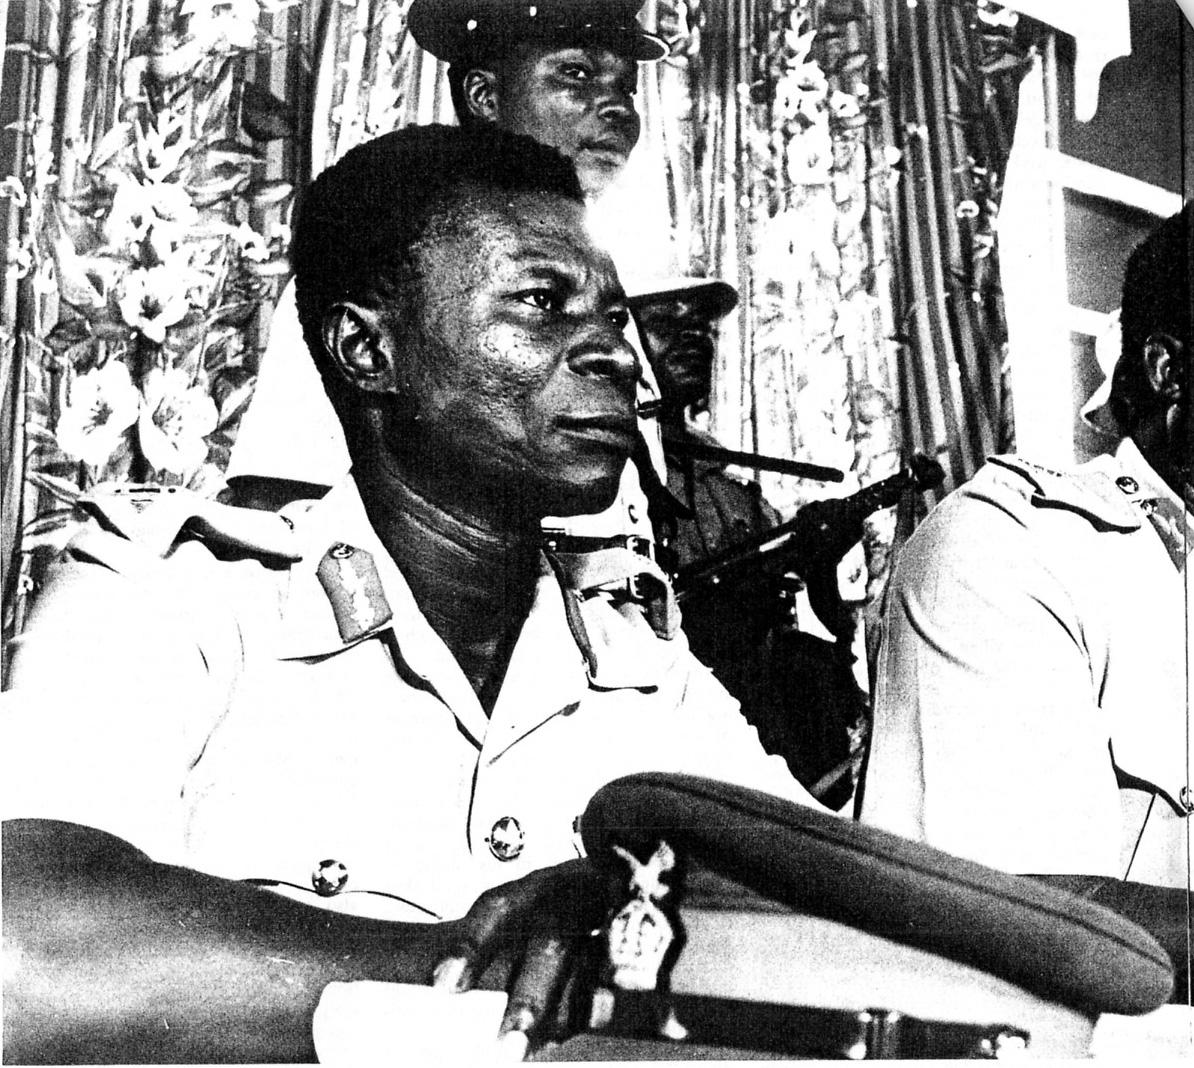 Major General Emmanuel kwasi Kotoka who was a member of the ruling National Liberation Council (NLC) which came to power in Ghana in a military coup d'état on 24 February 1966 was killed in an abortive coup attempt involving junior officers. It was code named Guitar boy